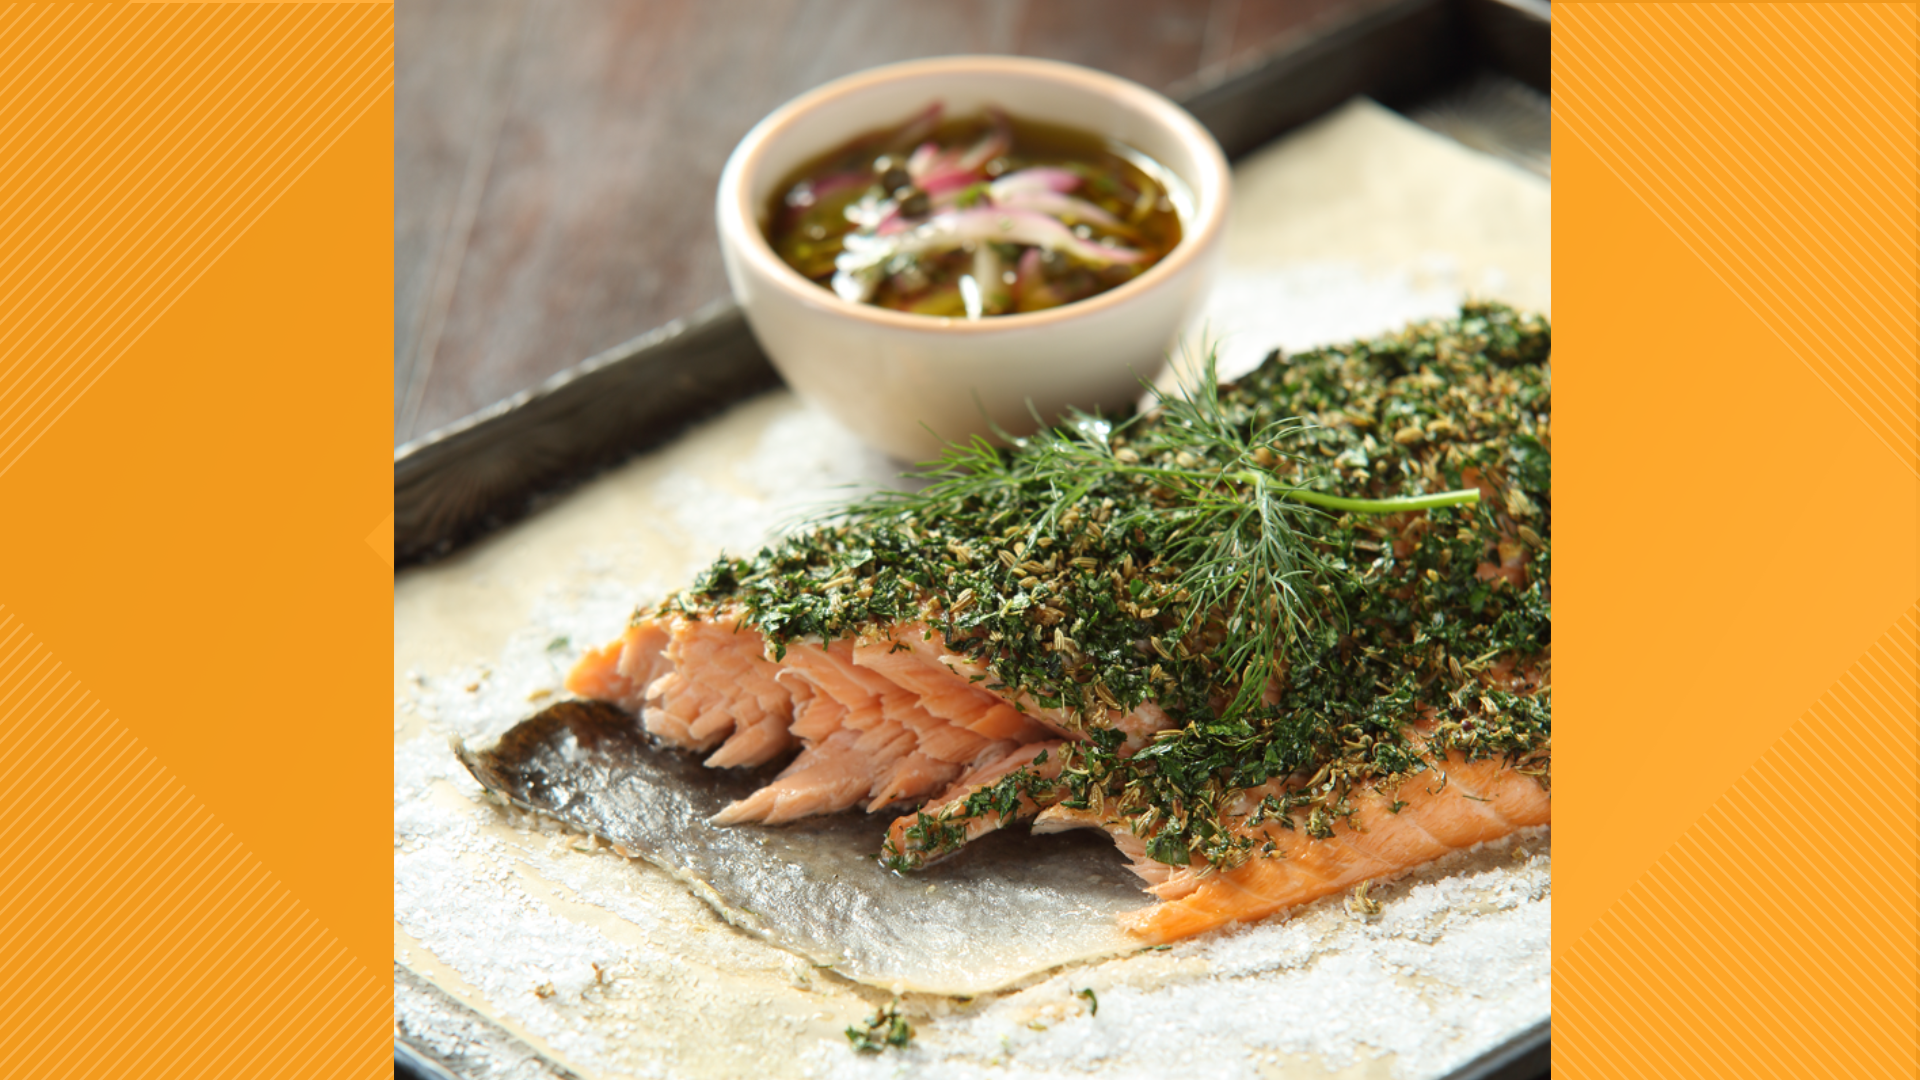 Check out this recipe for oven-baked salmon from the Kowalski's Markets culinary director.